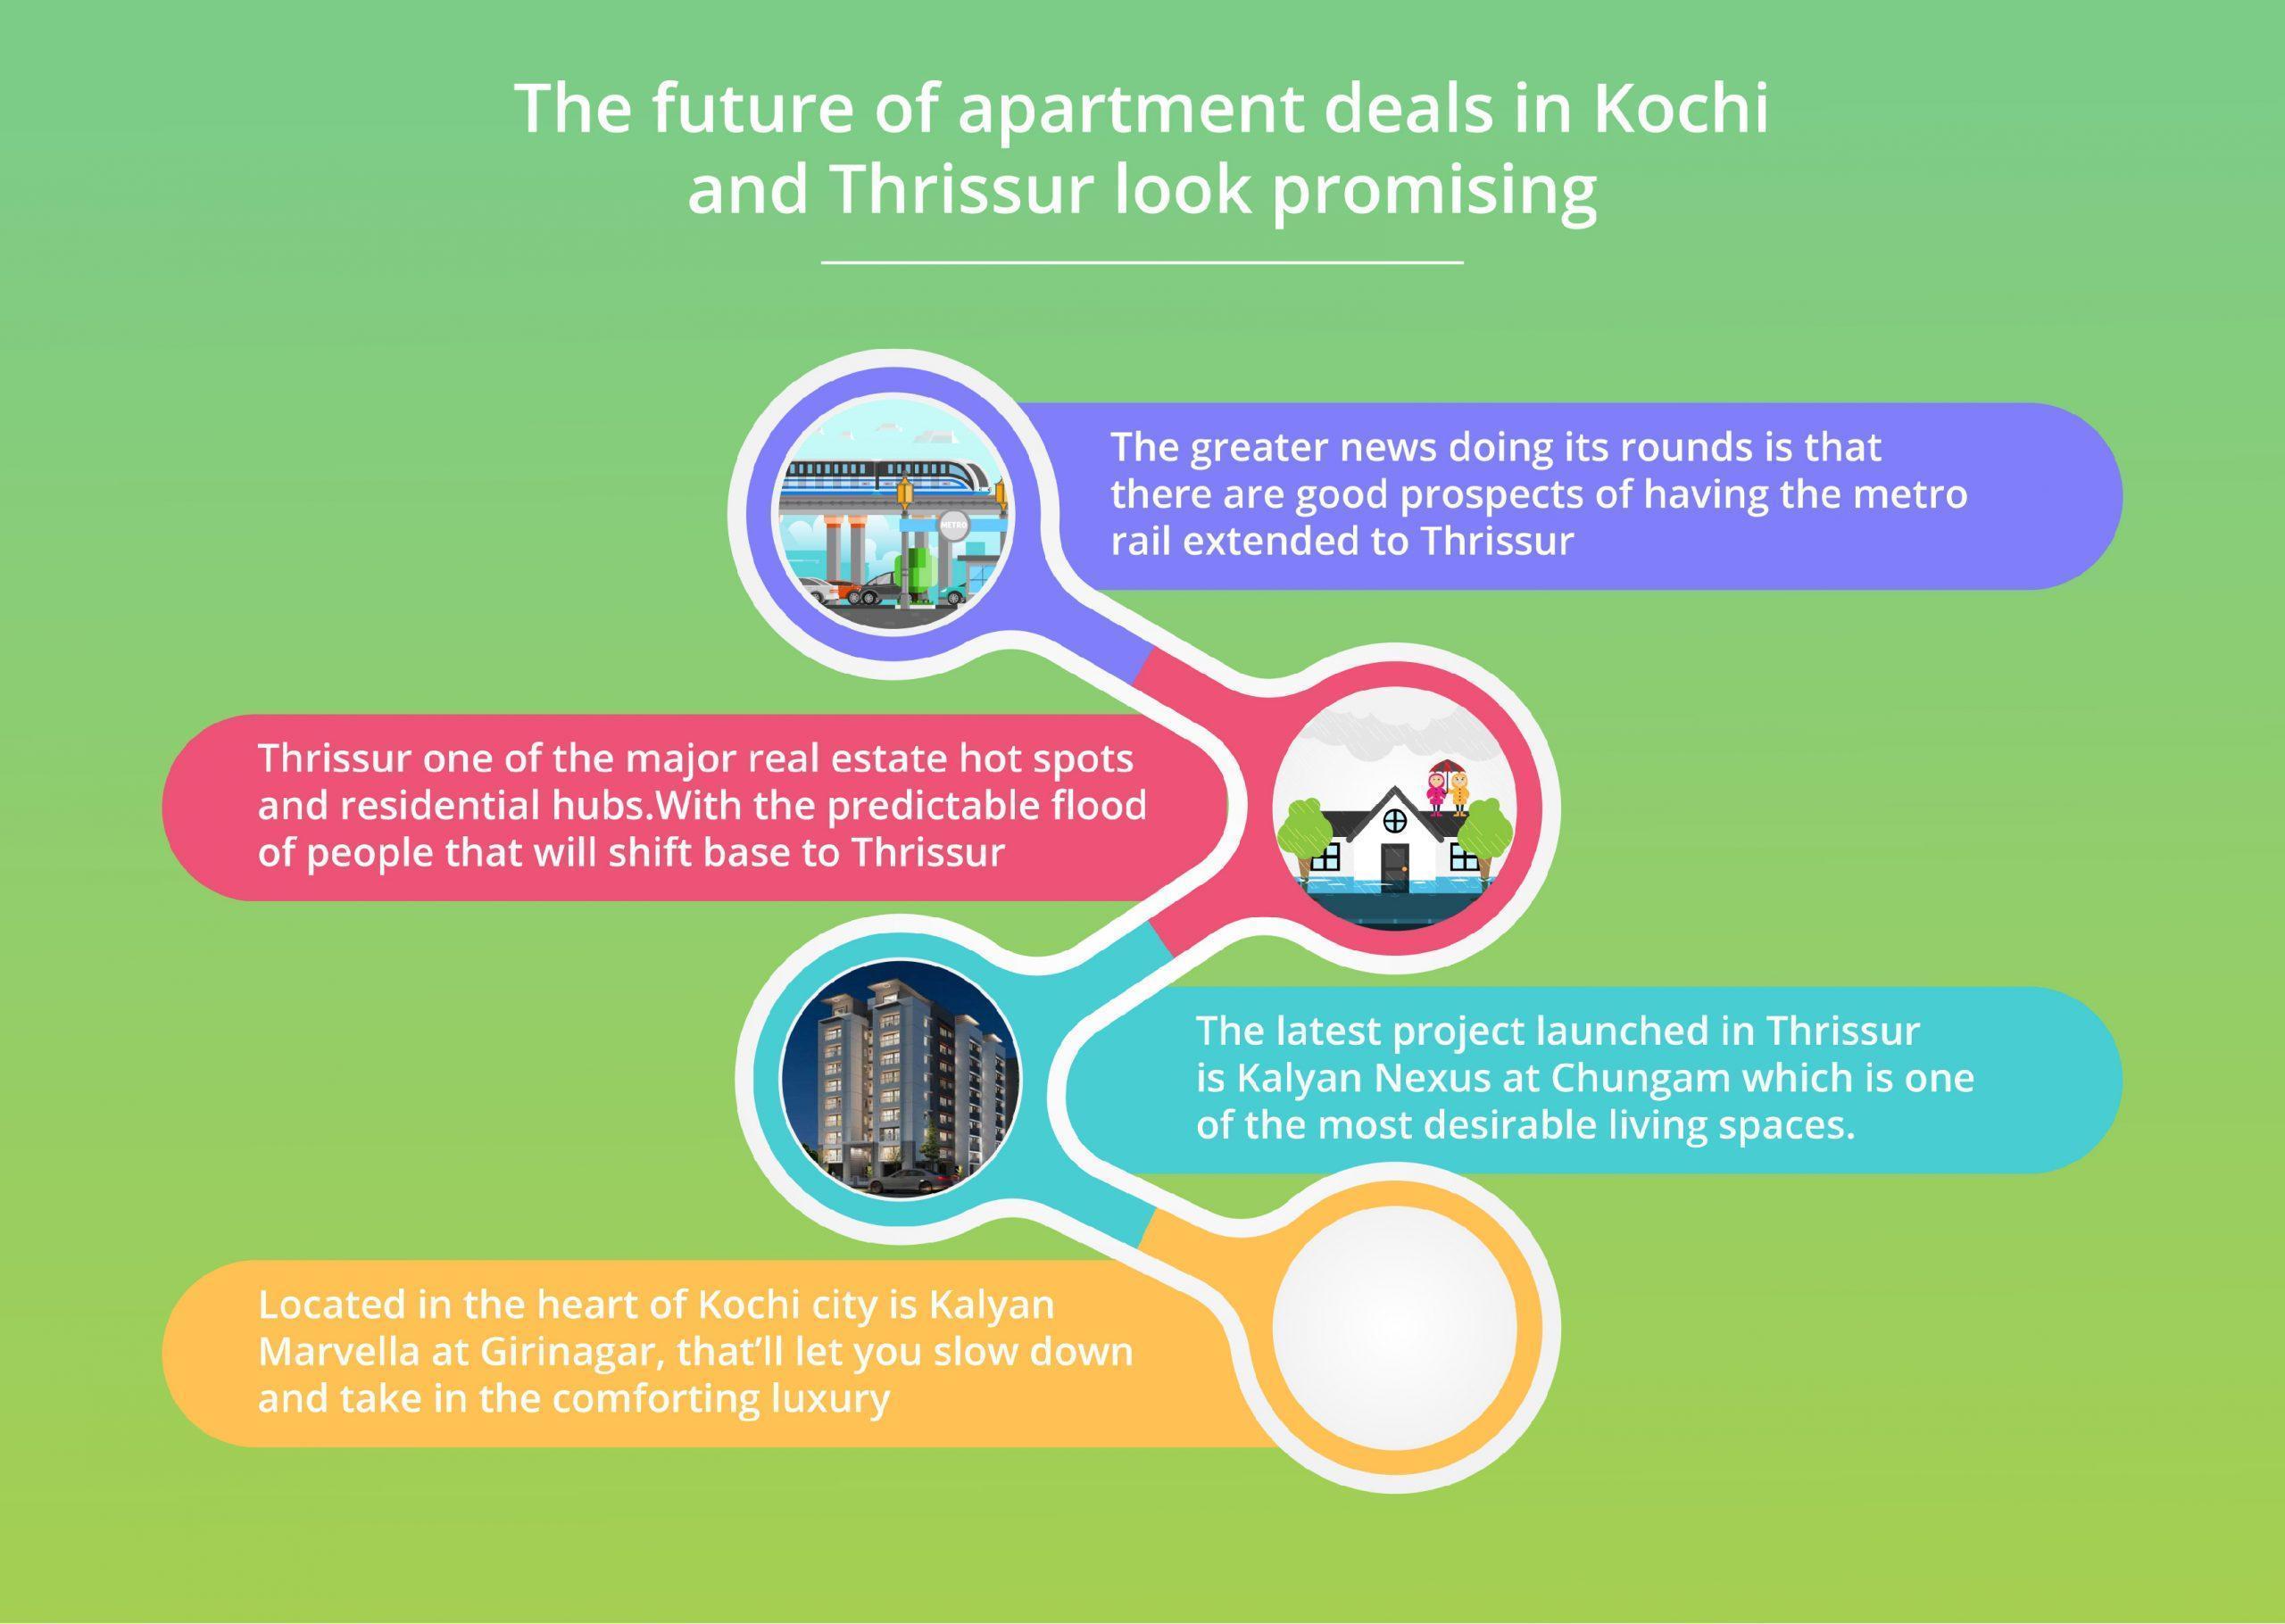 The future of apartment deals in Kochi and Thrissur look promising